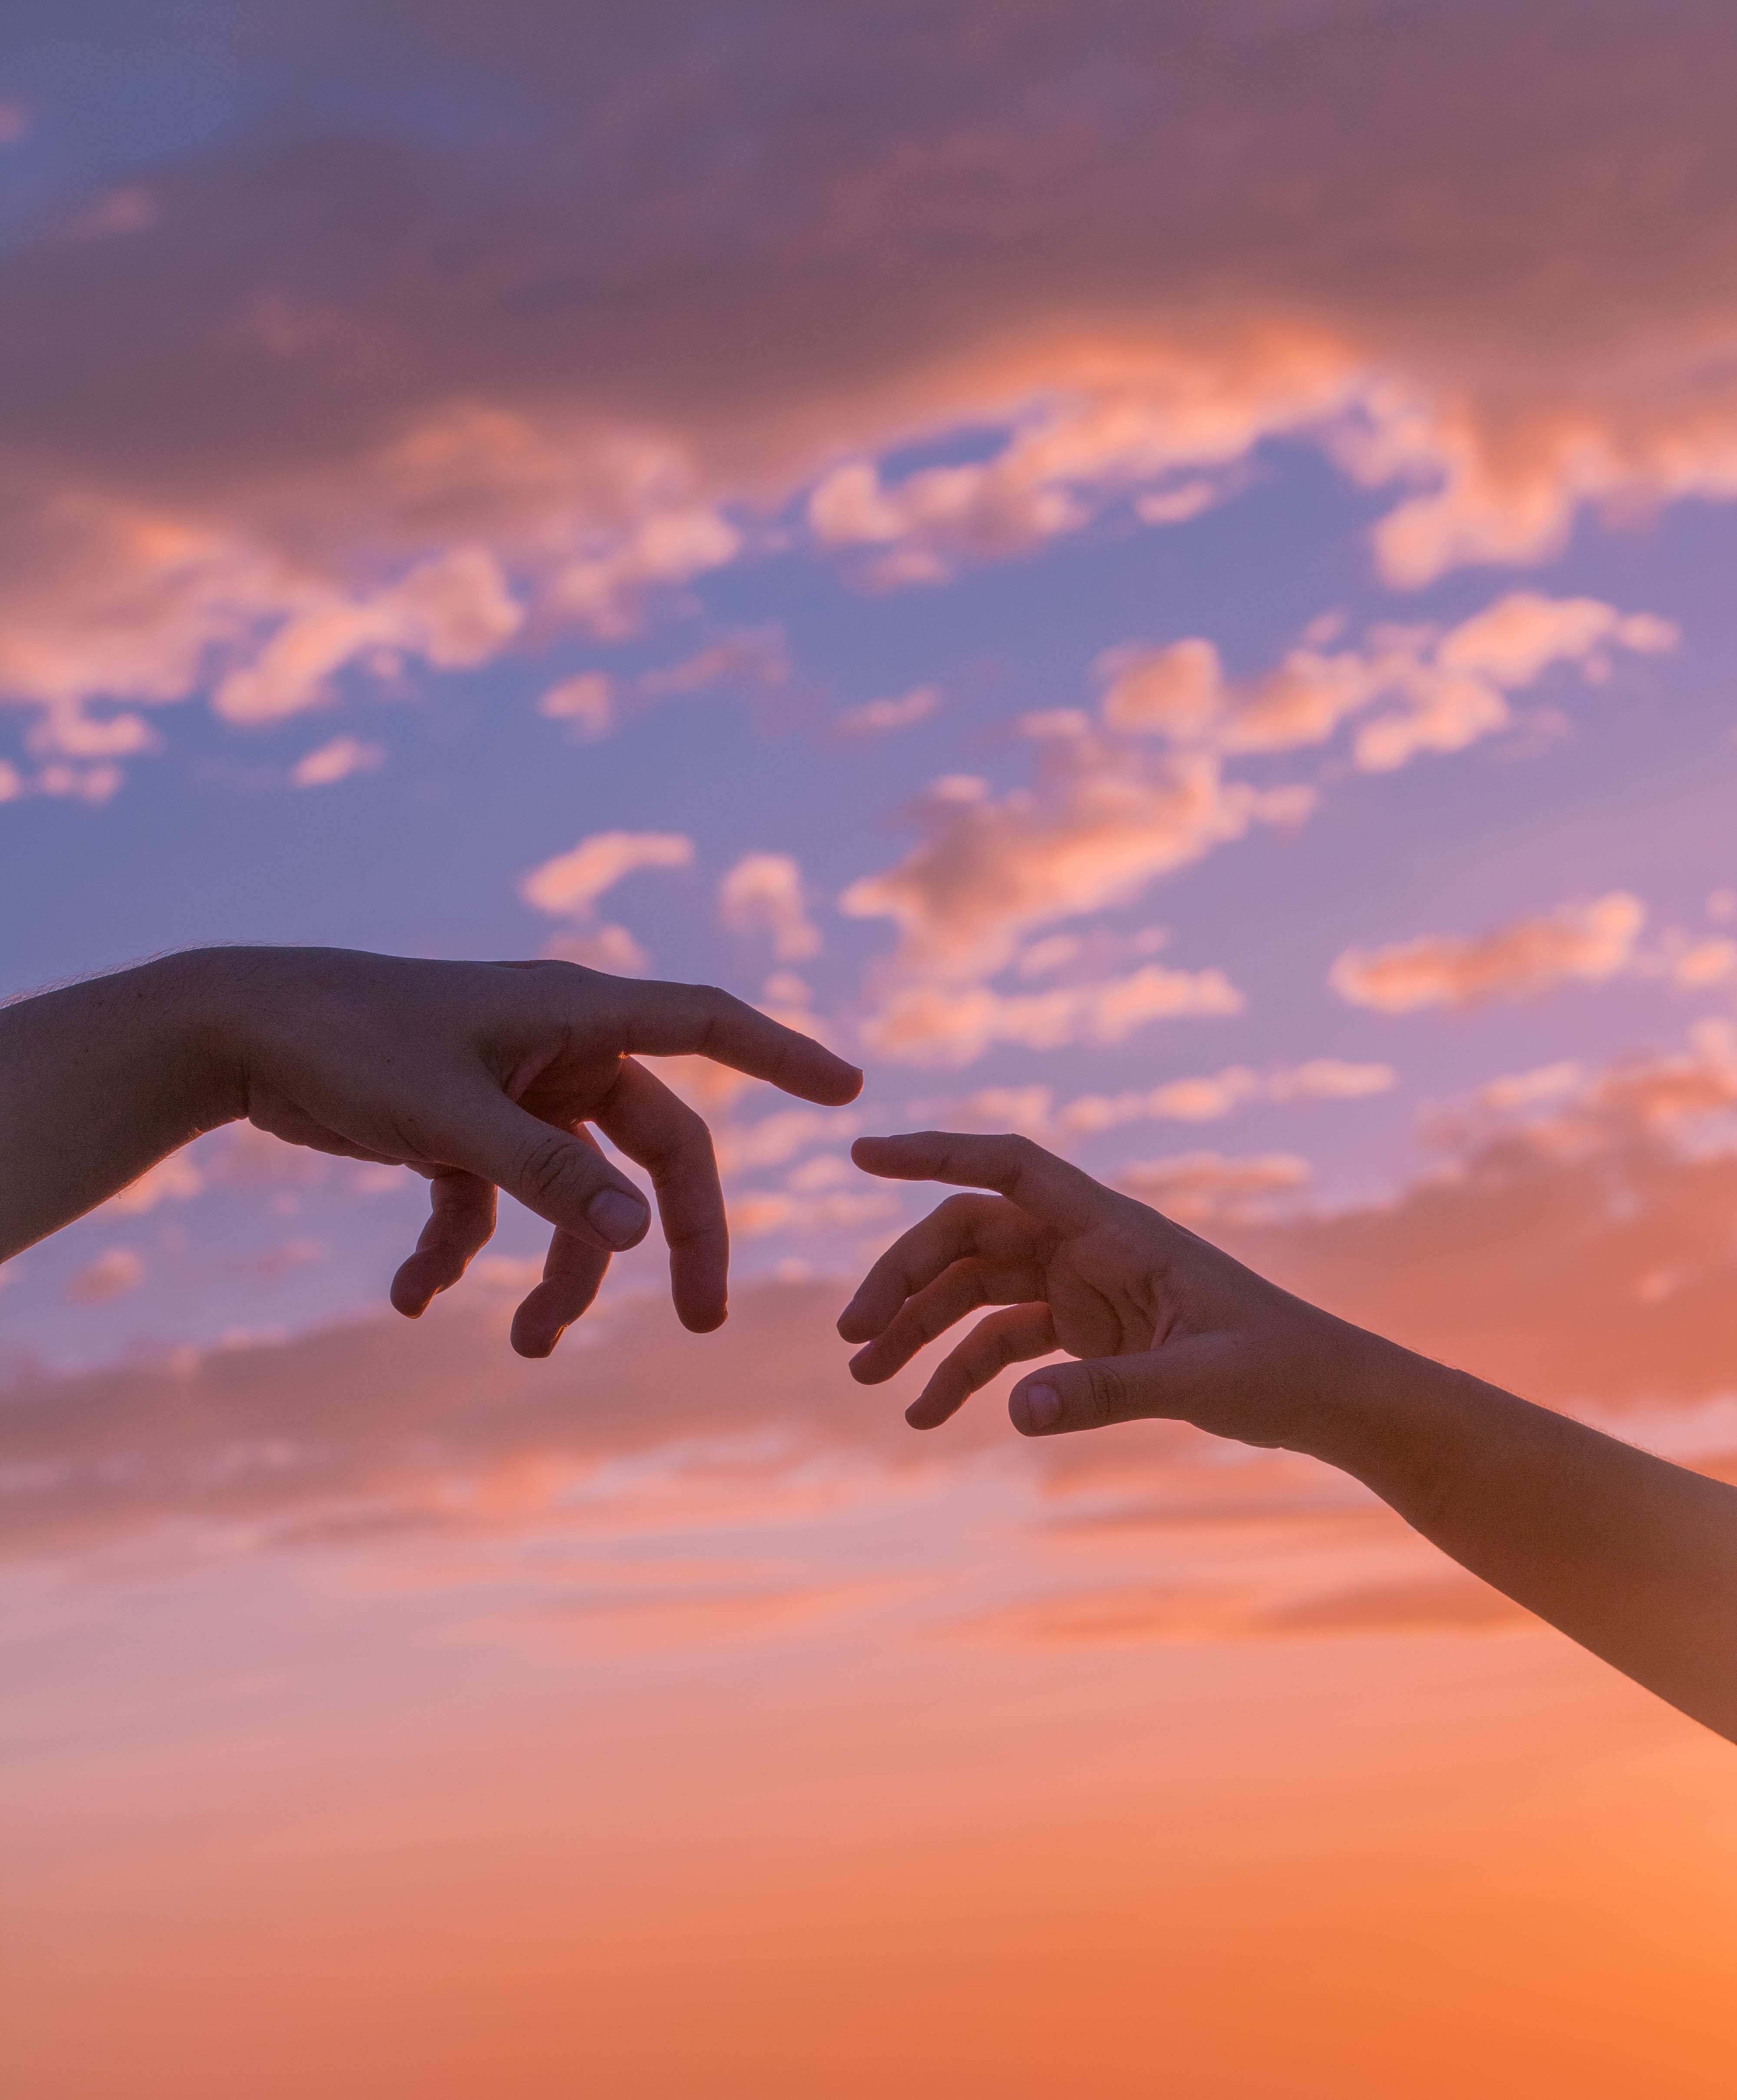 Hands reaching for each other.│Source: Pexels